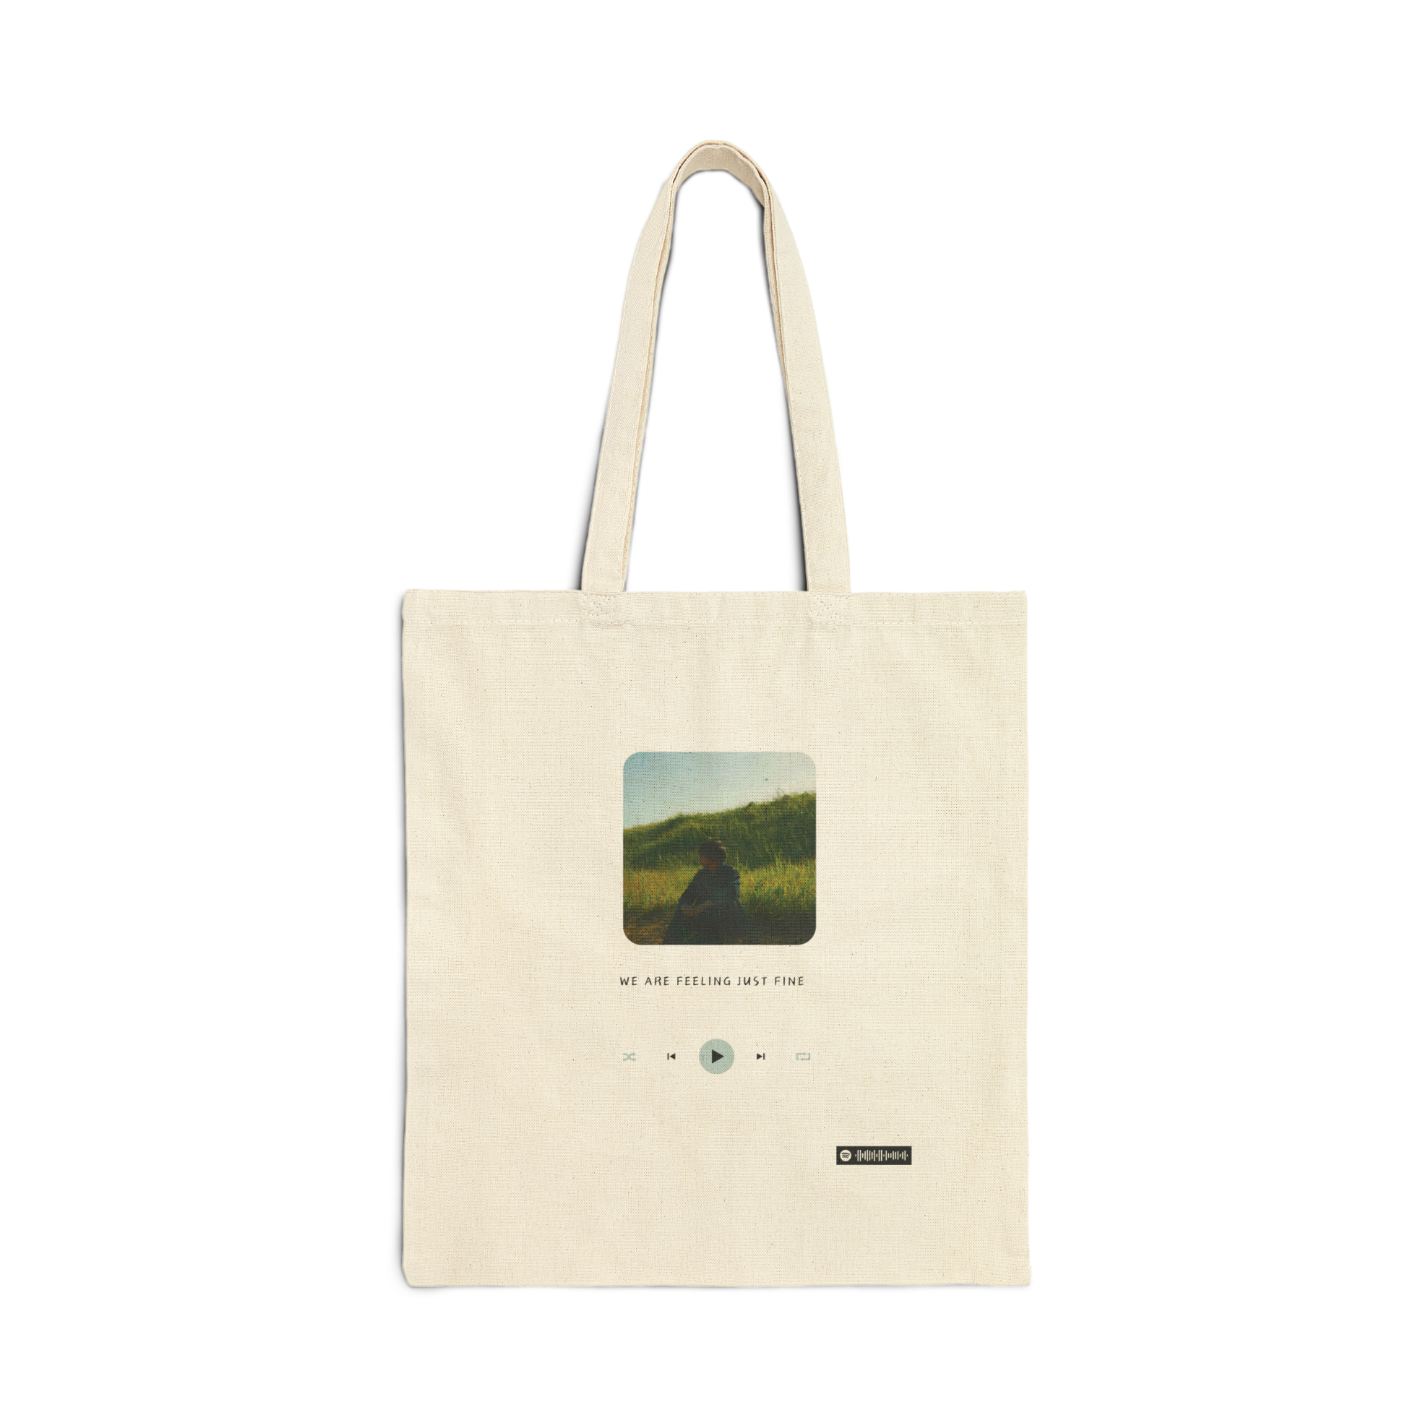 Feeling Just Fine Tote Bags